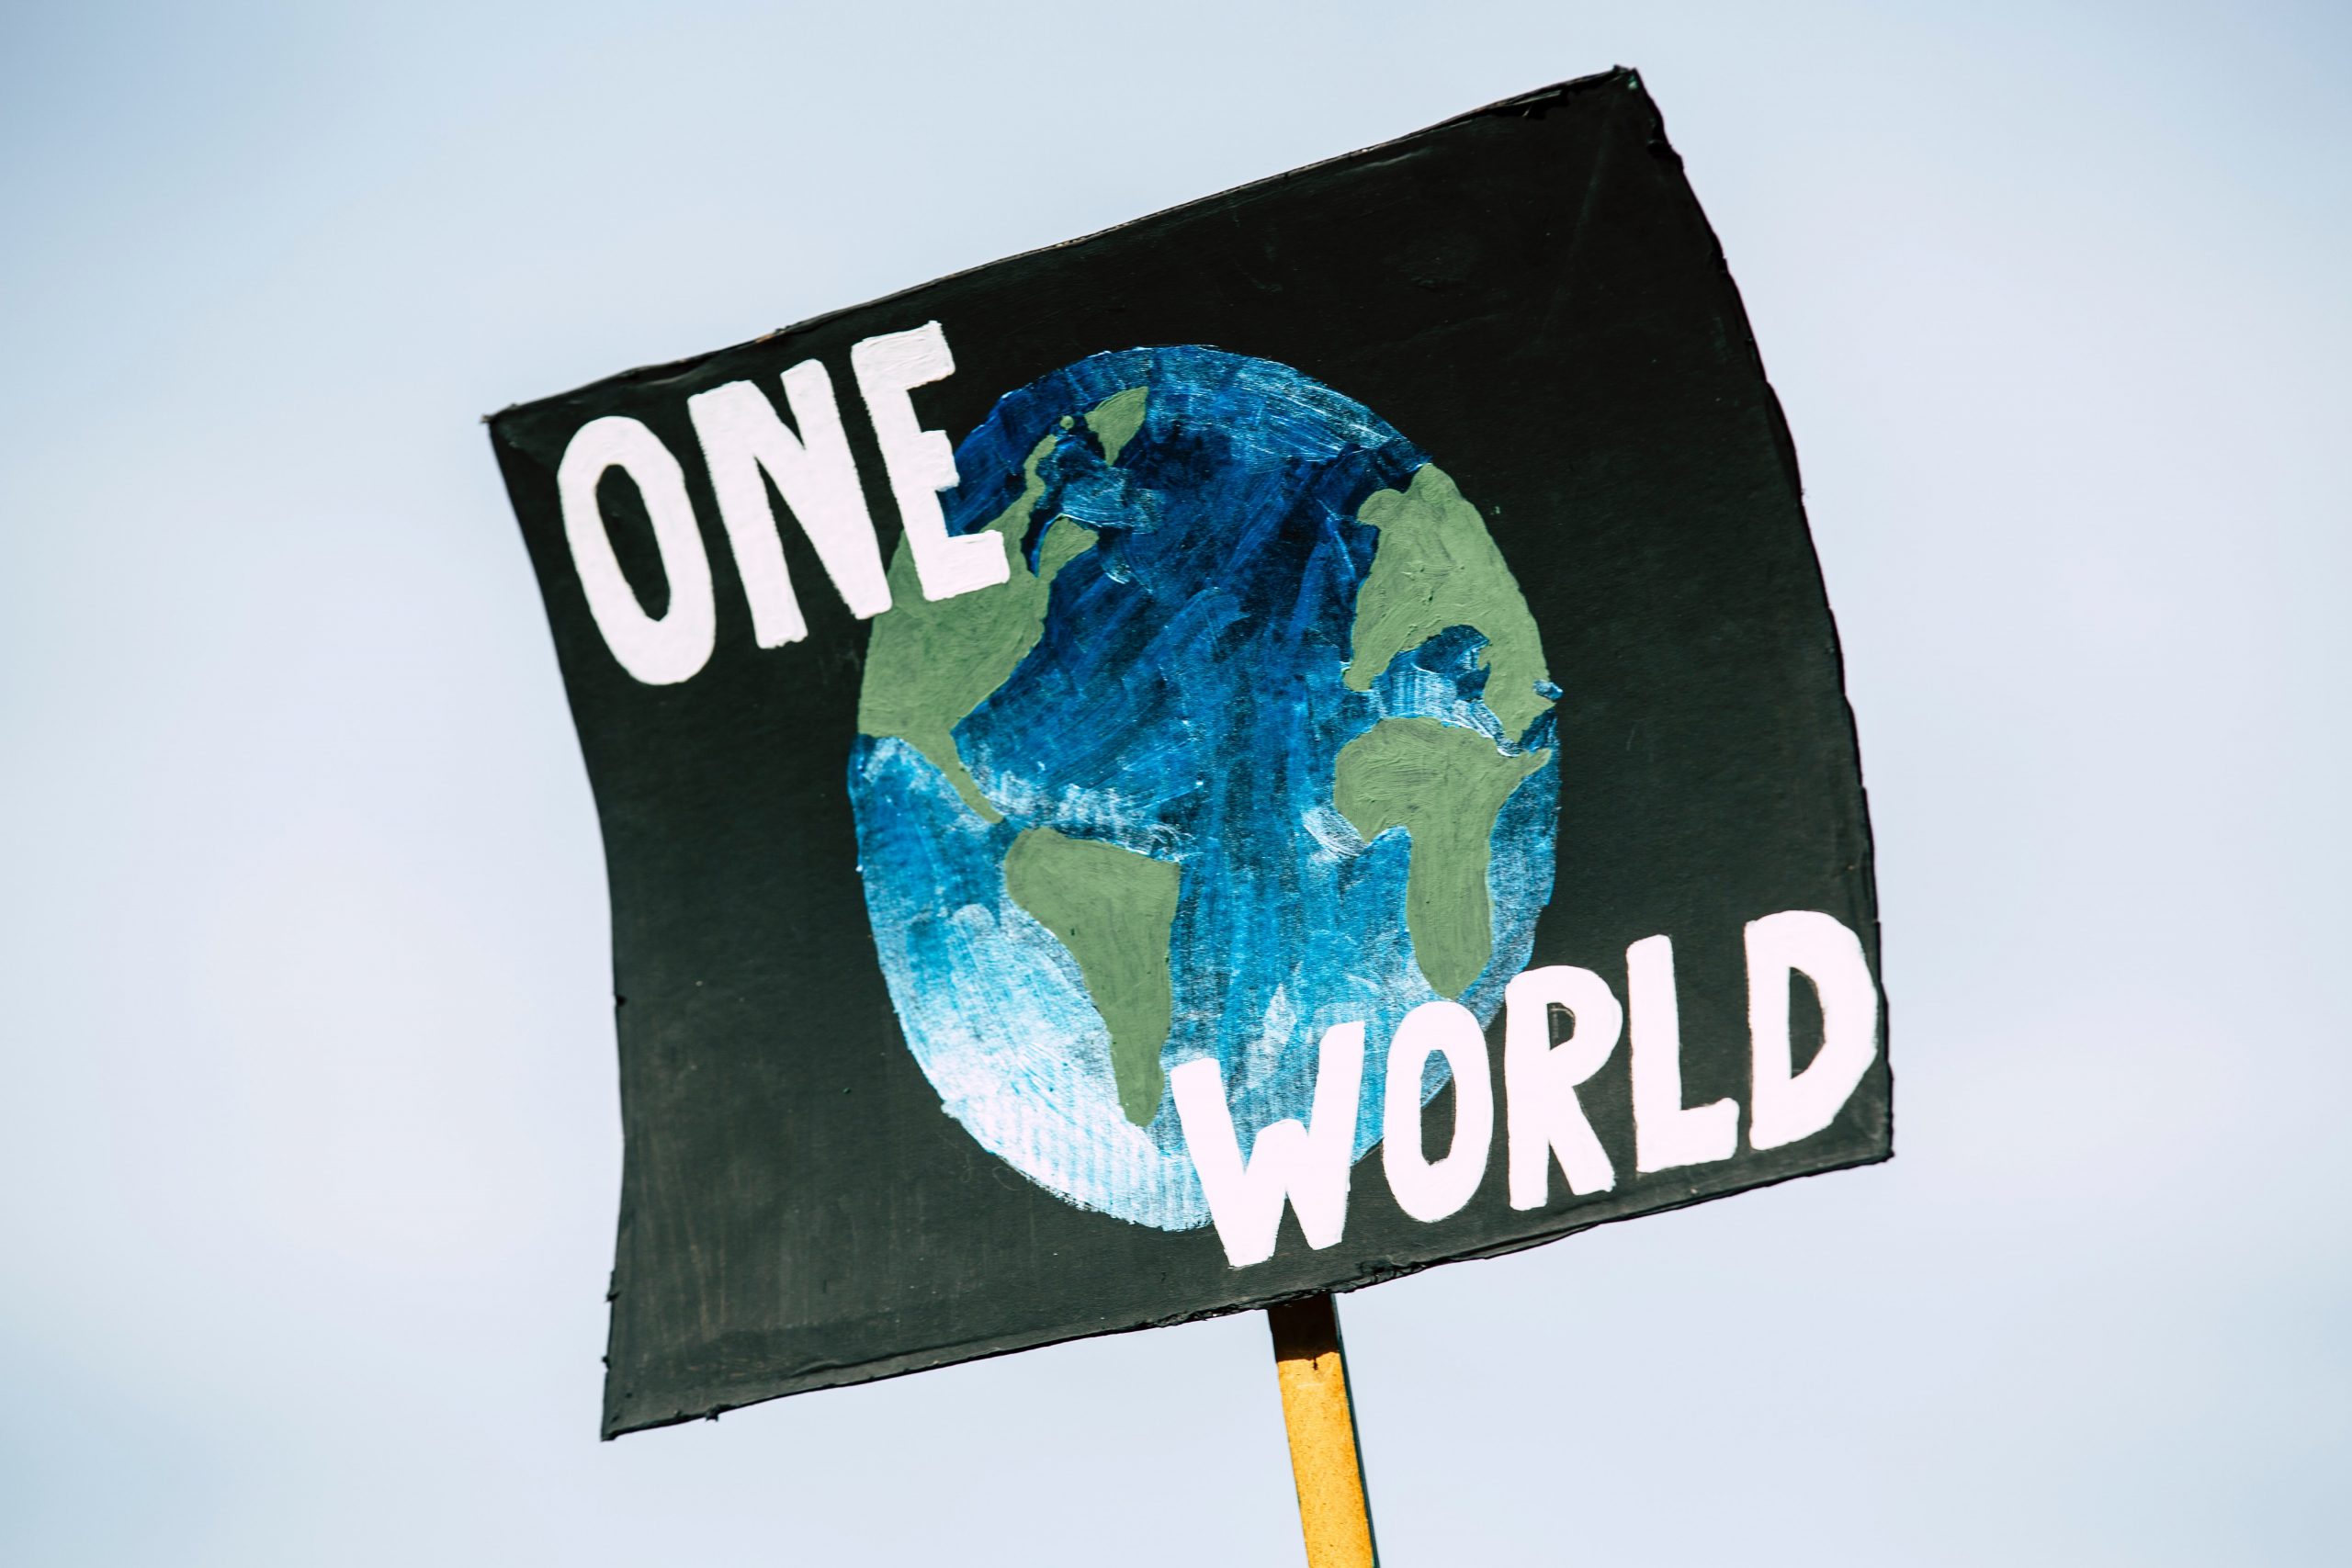 A sign held against a blue sky reads "one world" in white lettering over a painting of planet Earth on a black background.